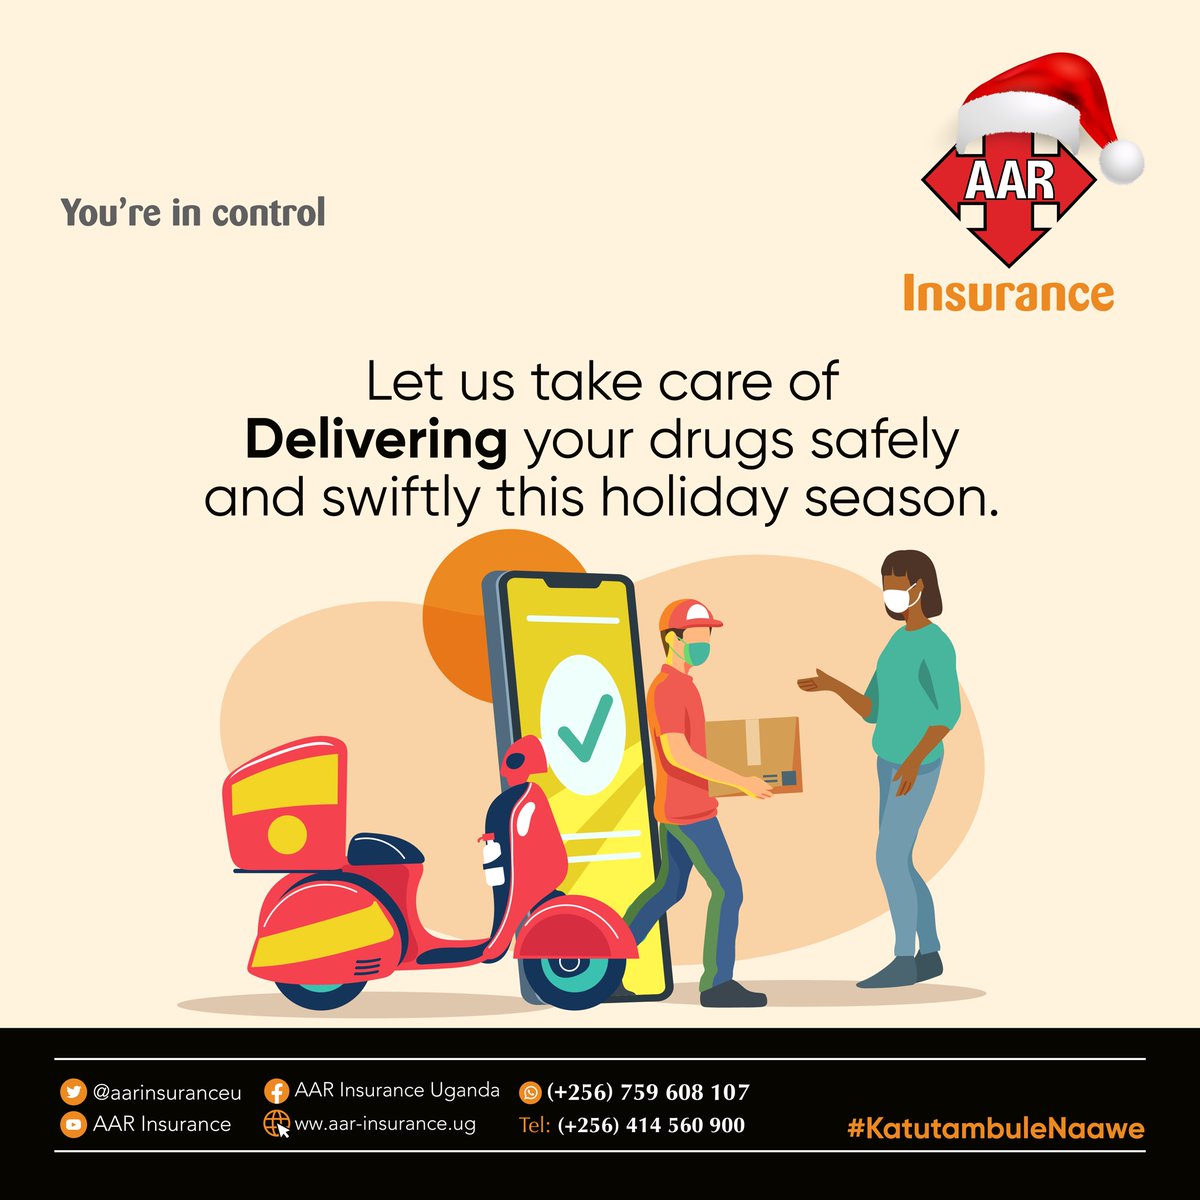 Send your prescription orders and have them delivered to your door step. WhatsApp us on 0706344342 or call directly 0773891855, 0706393635 to have your order delivered.
#AARInsurance #KatutambuleNawe